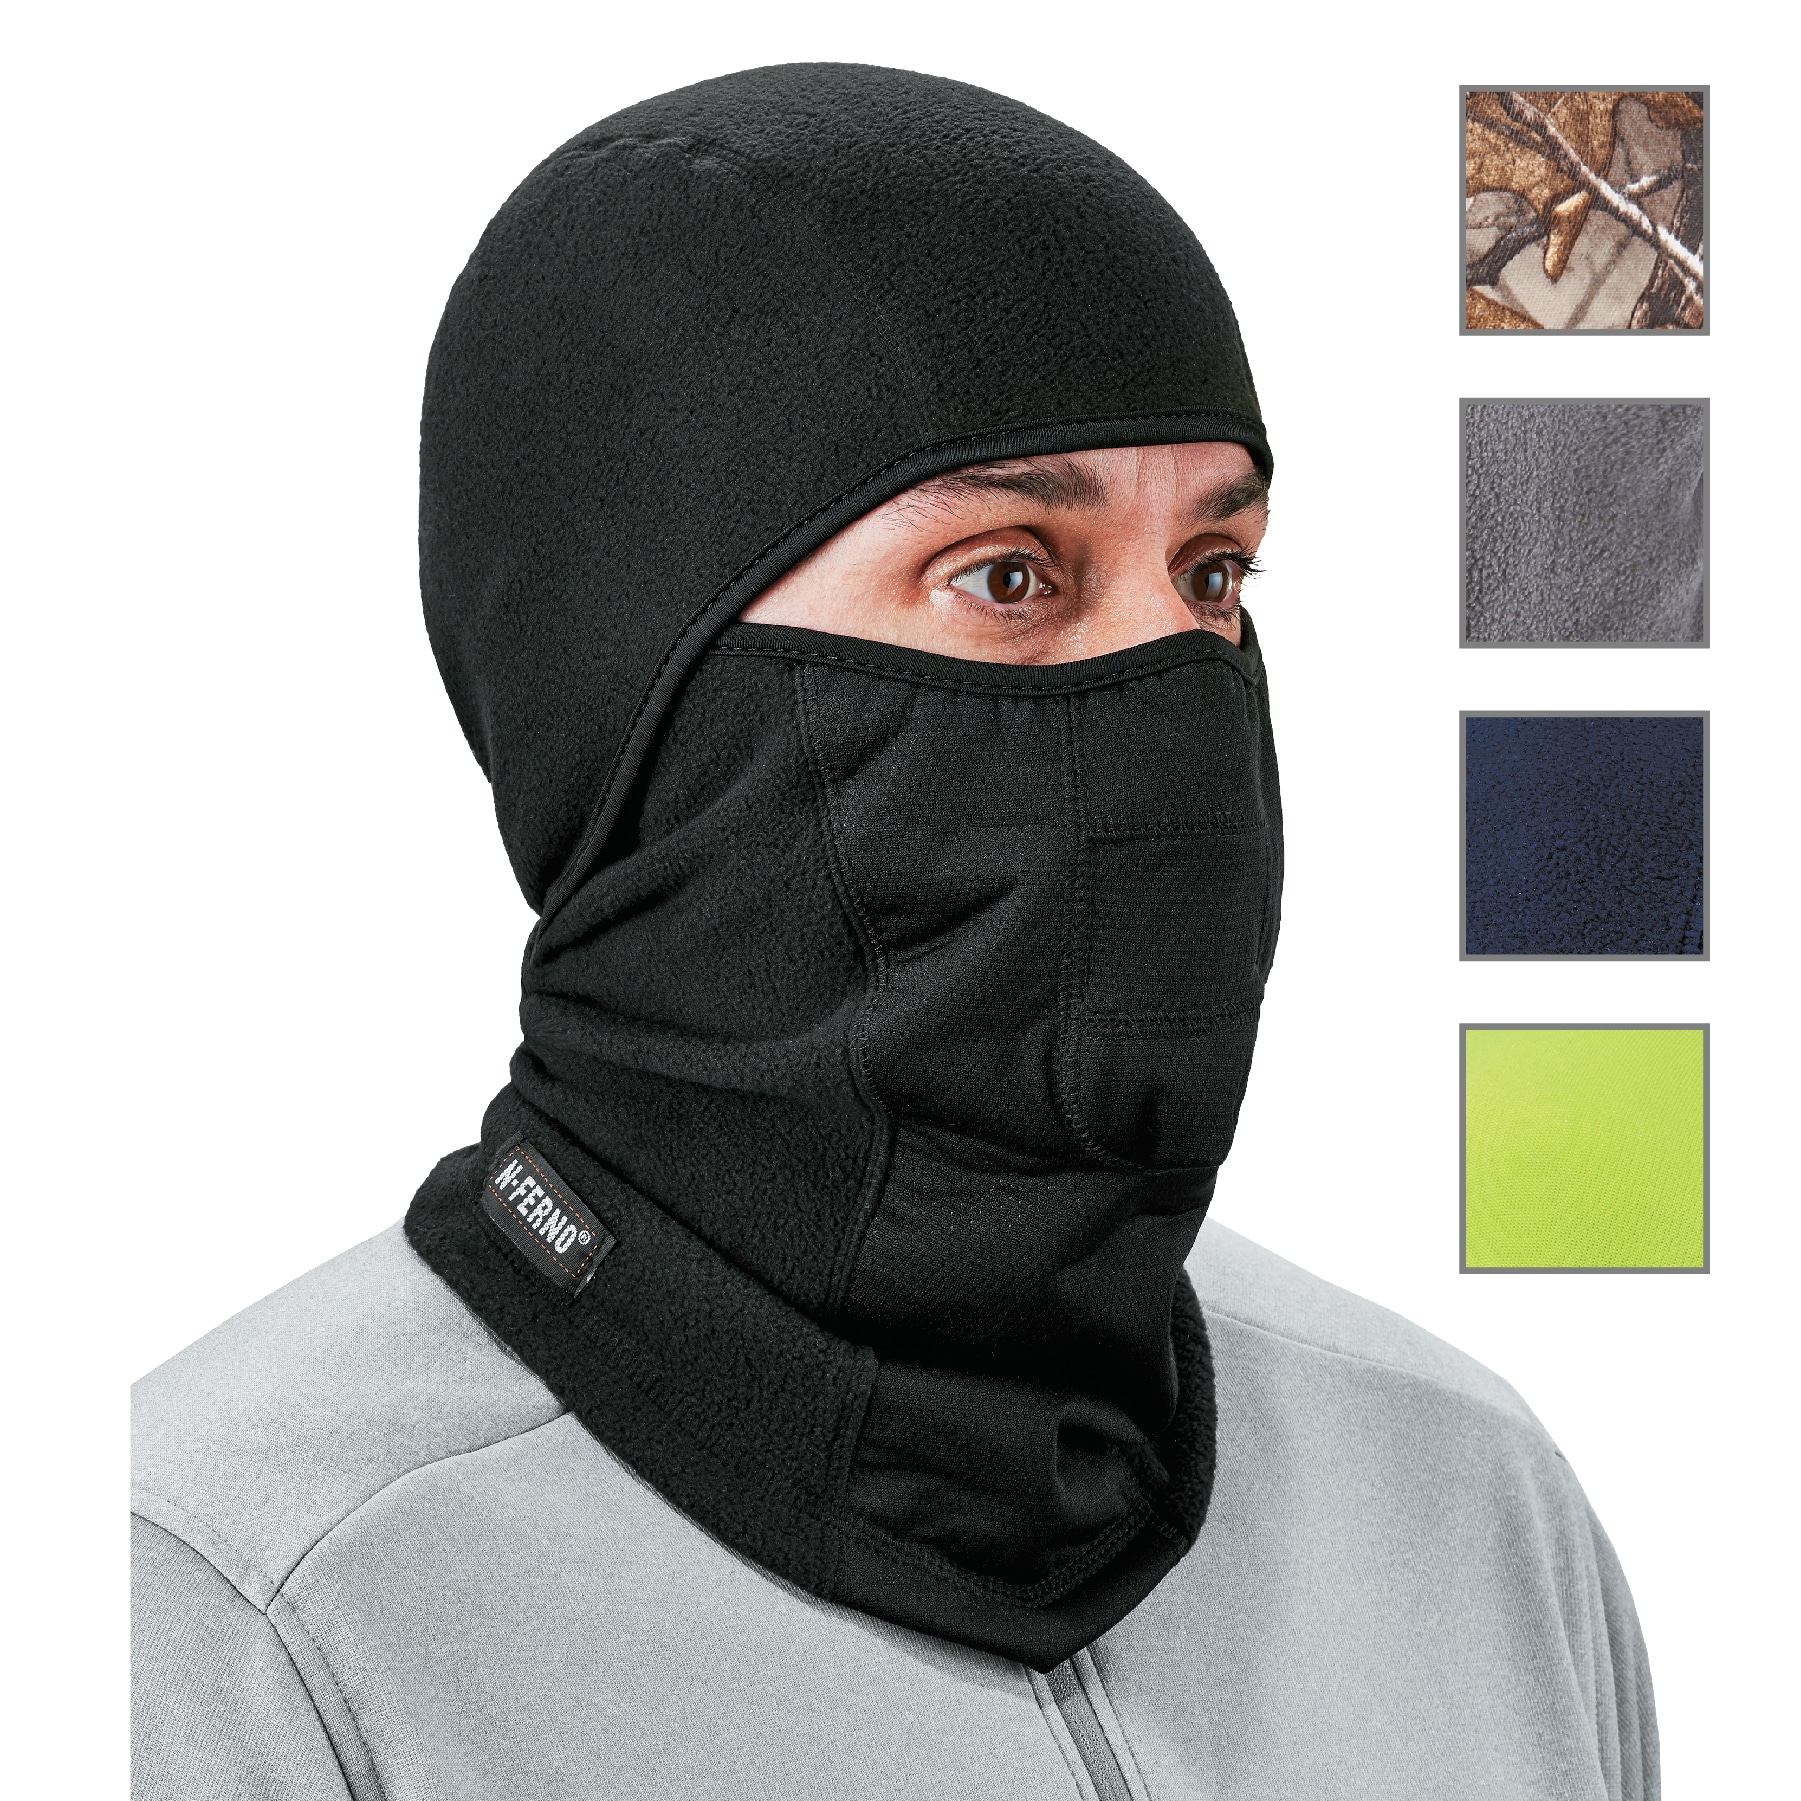 N-Ferno Black Synthetic Balaclava in the Cold Weather Headwear department  at Lowes.com